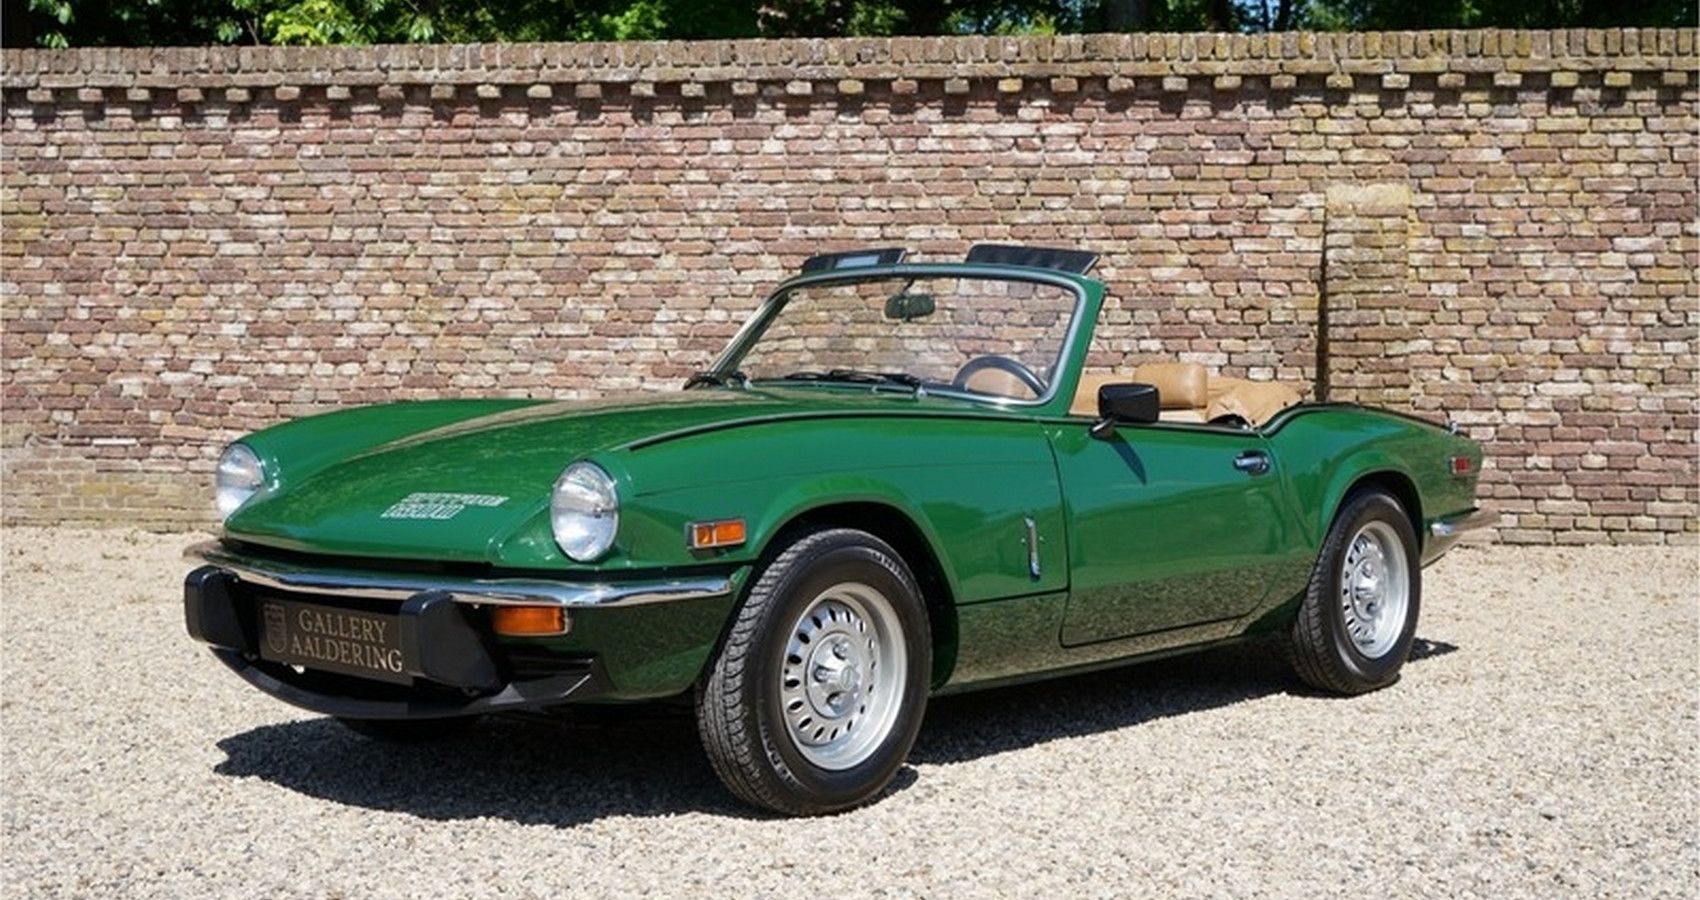 British Racing Green Triumph Spifire 1500 sports car parked